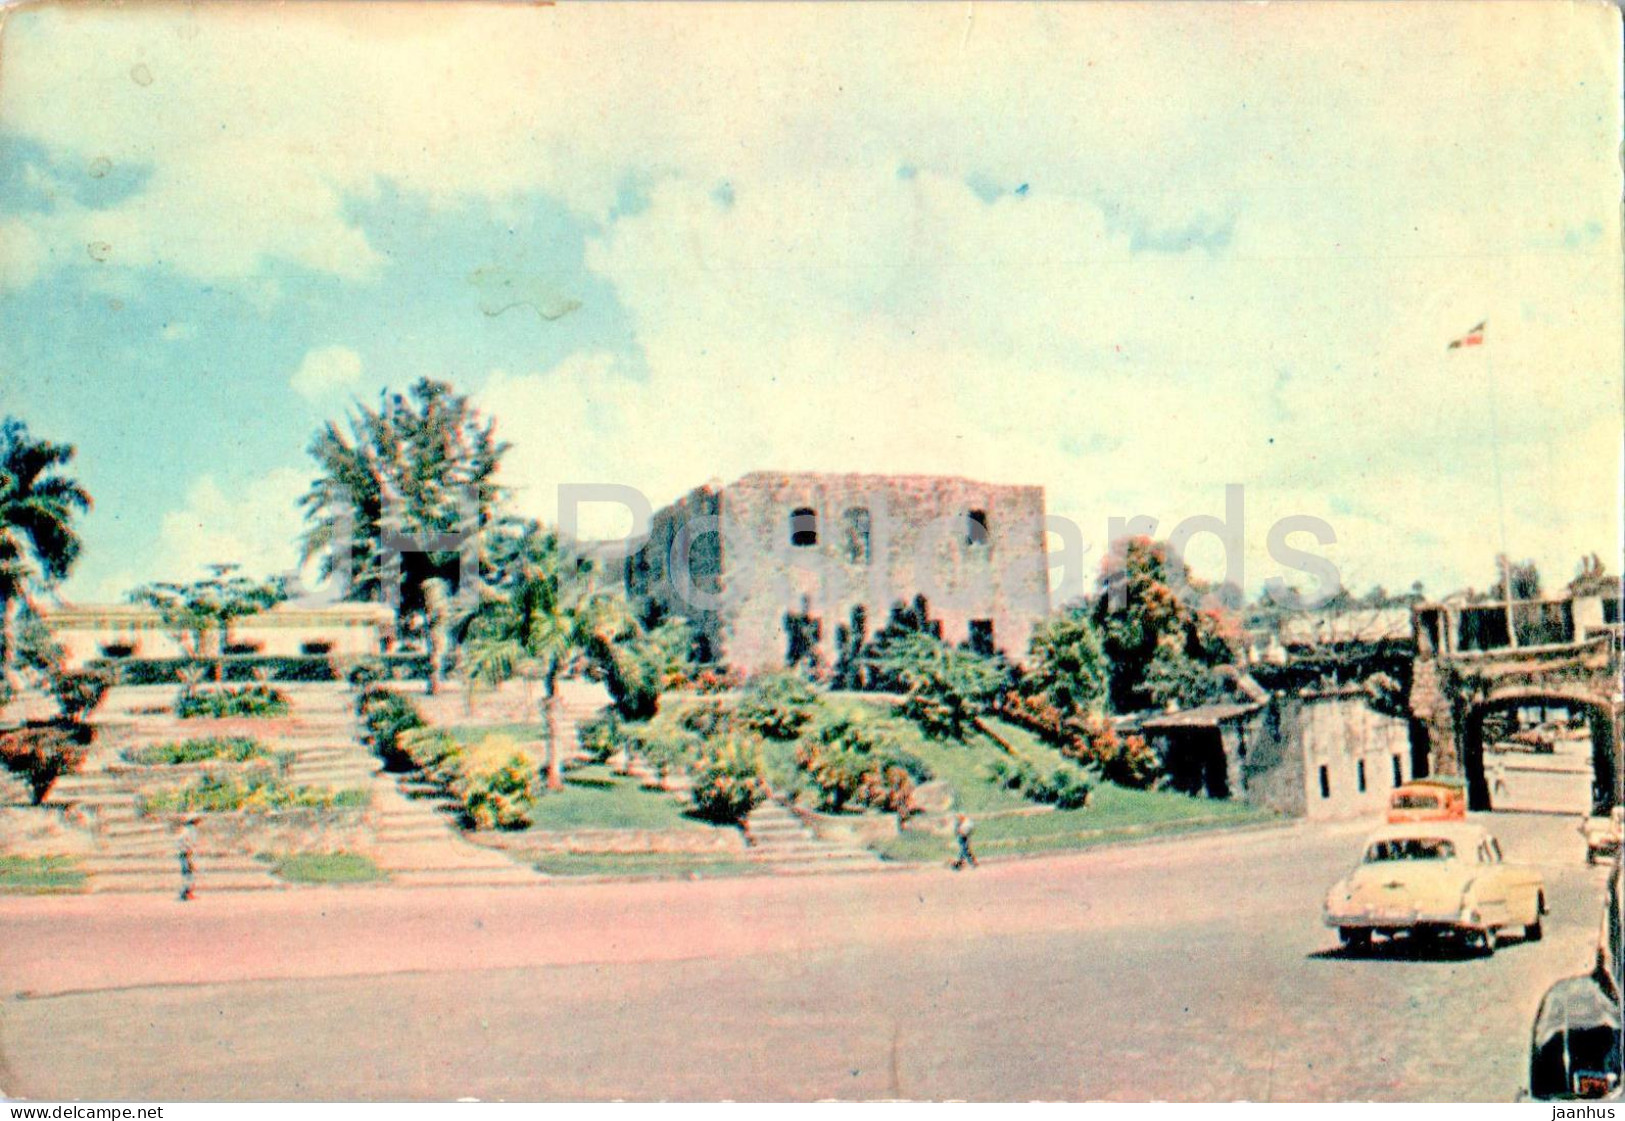 Christophe Colomb Aux Indes Occidentales - Plasmarine - Old Postcard - 1955 - Dominican Republic - Used - Dominikanische Rep.